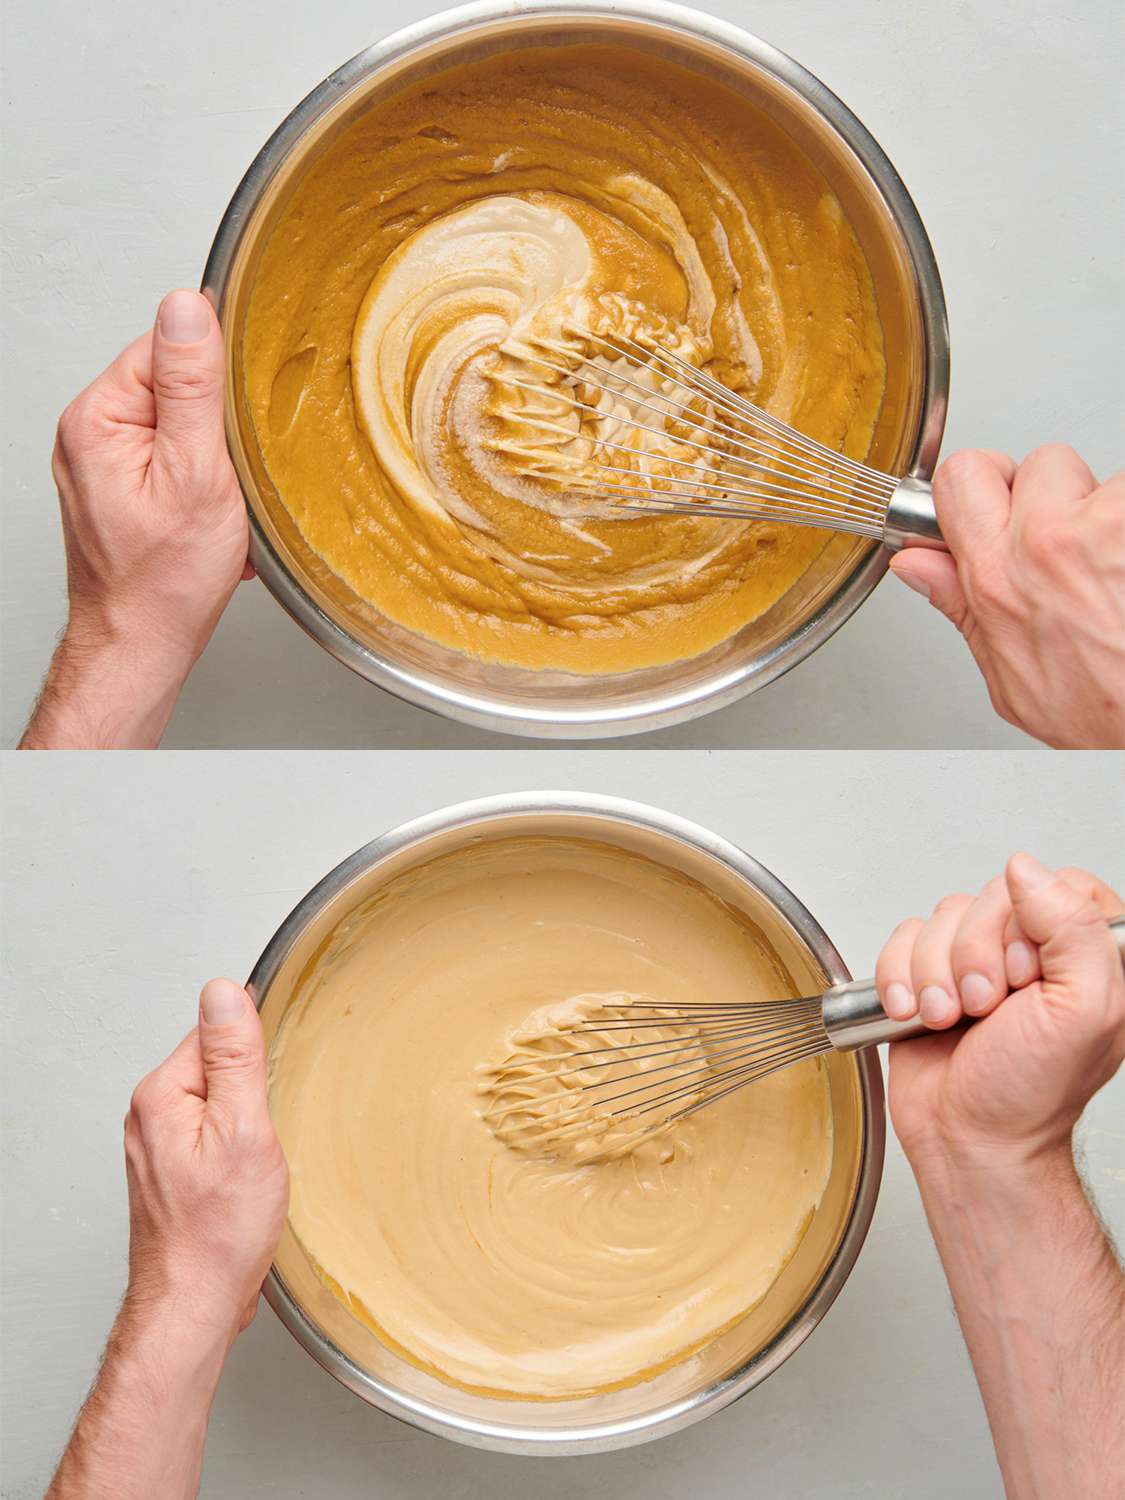 A two-image collage. The top image shows tahini being whisked into the still-hot chickpea mixture inside a large bowl. The bottom image shows the now-formed hummus inside of the metal bowl.